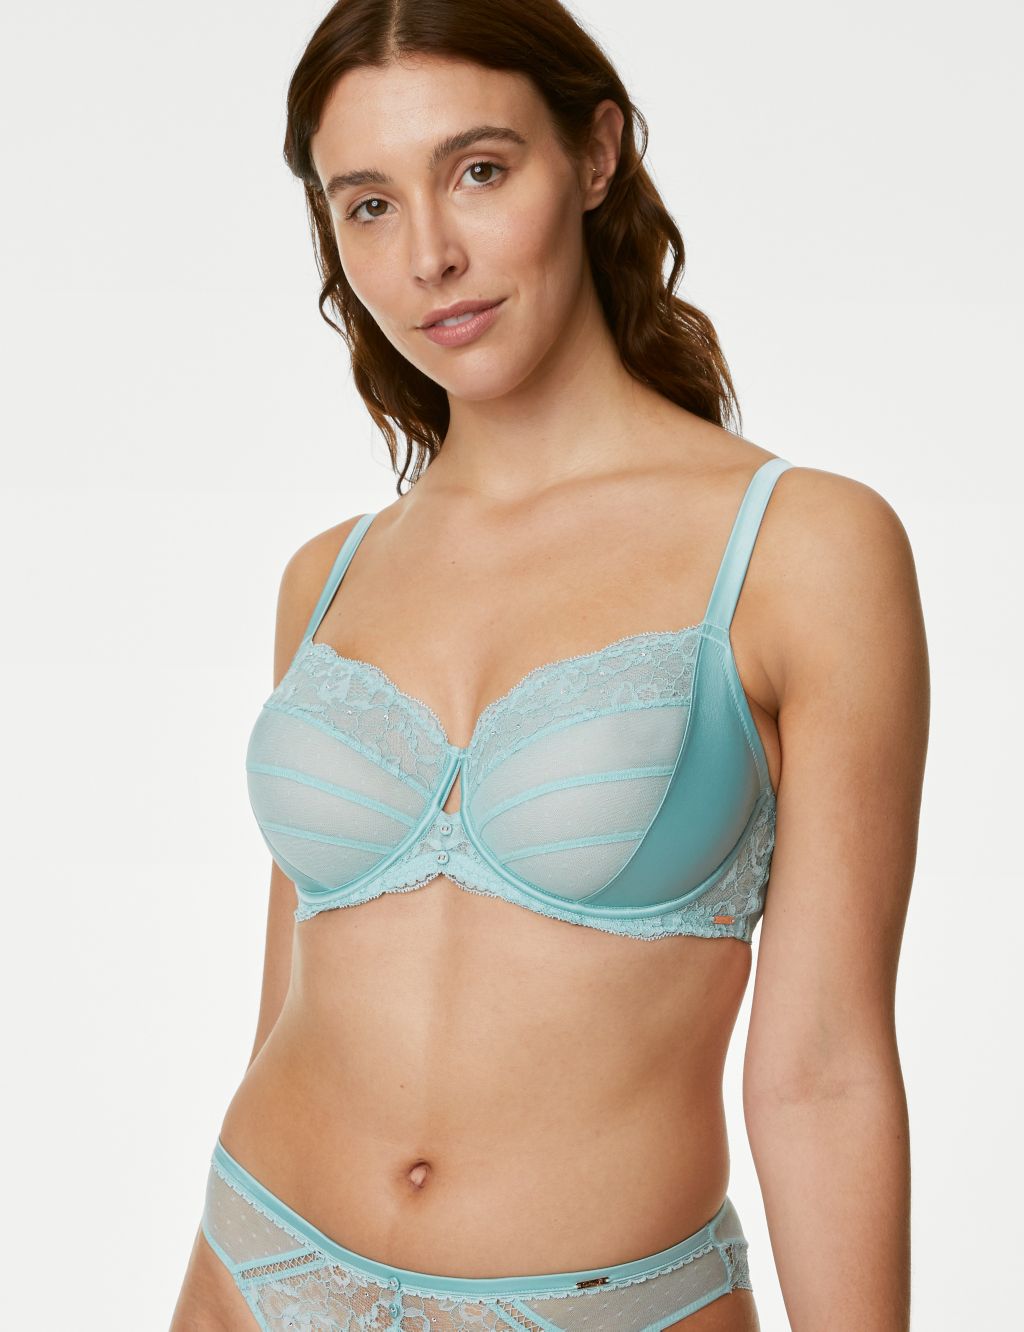 Aster Sparkle Lace Wired Balcony Bra Set F-H image 3